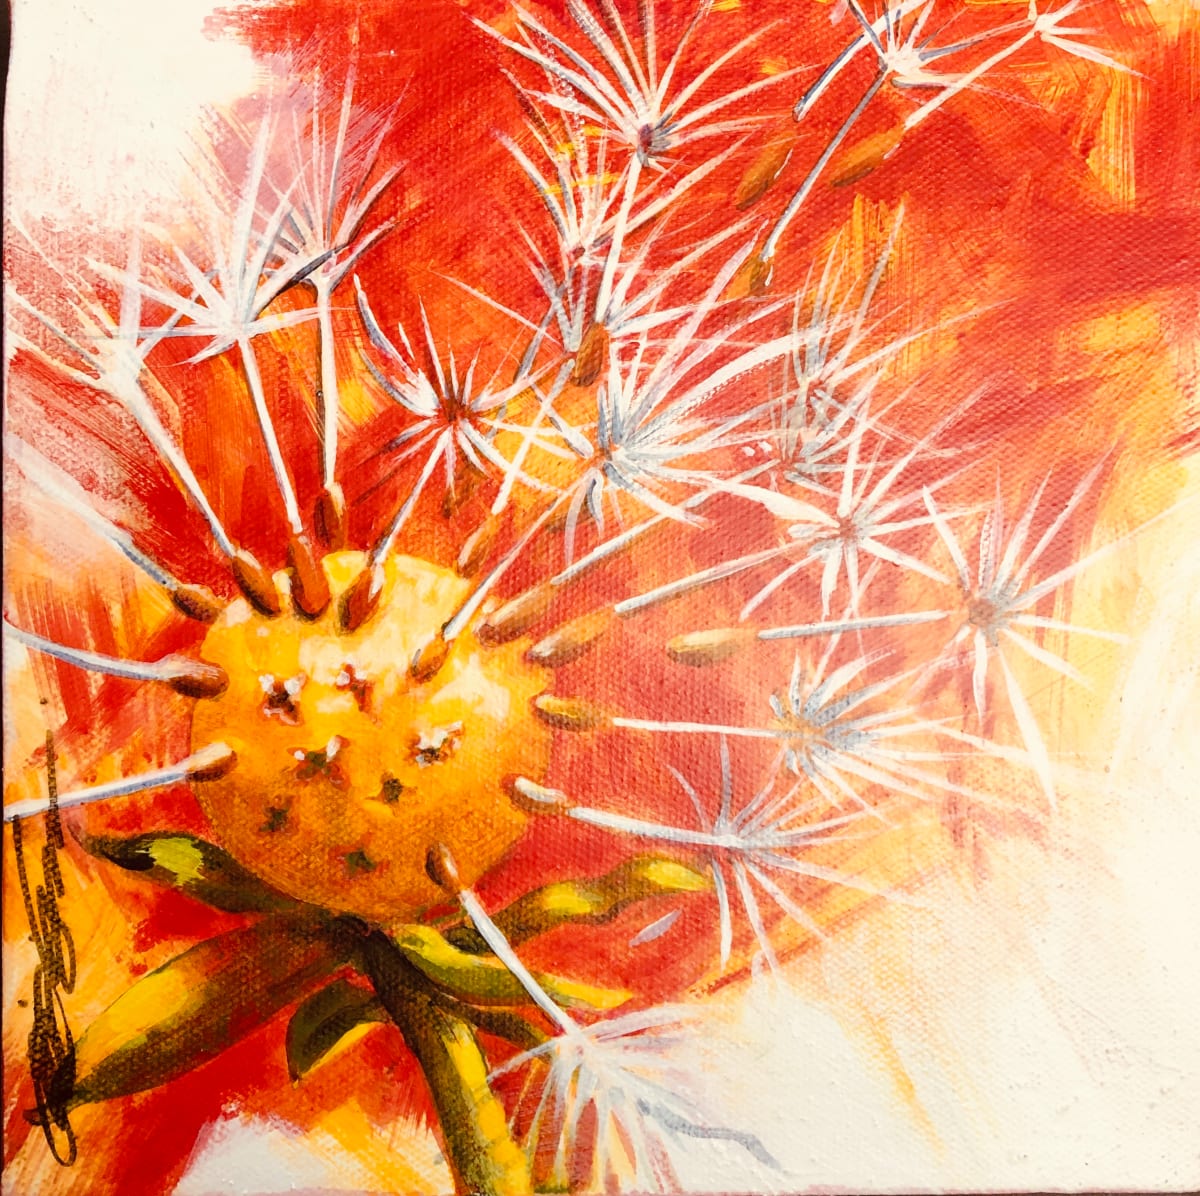 Wishes by Karen Phillips~Curran  Image: Wishes
8x8" acrylic painting on canvas ready to hang